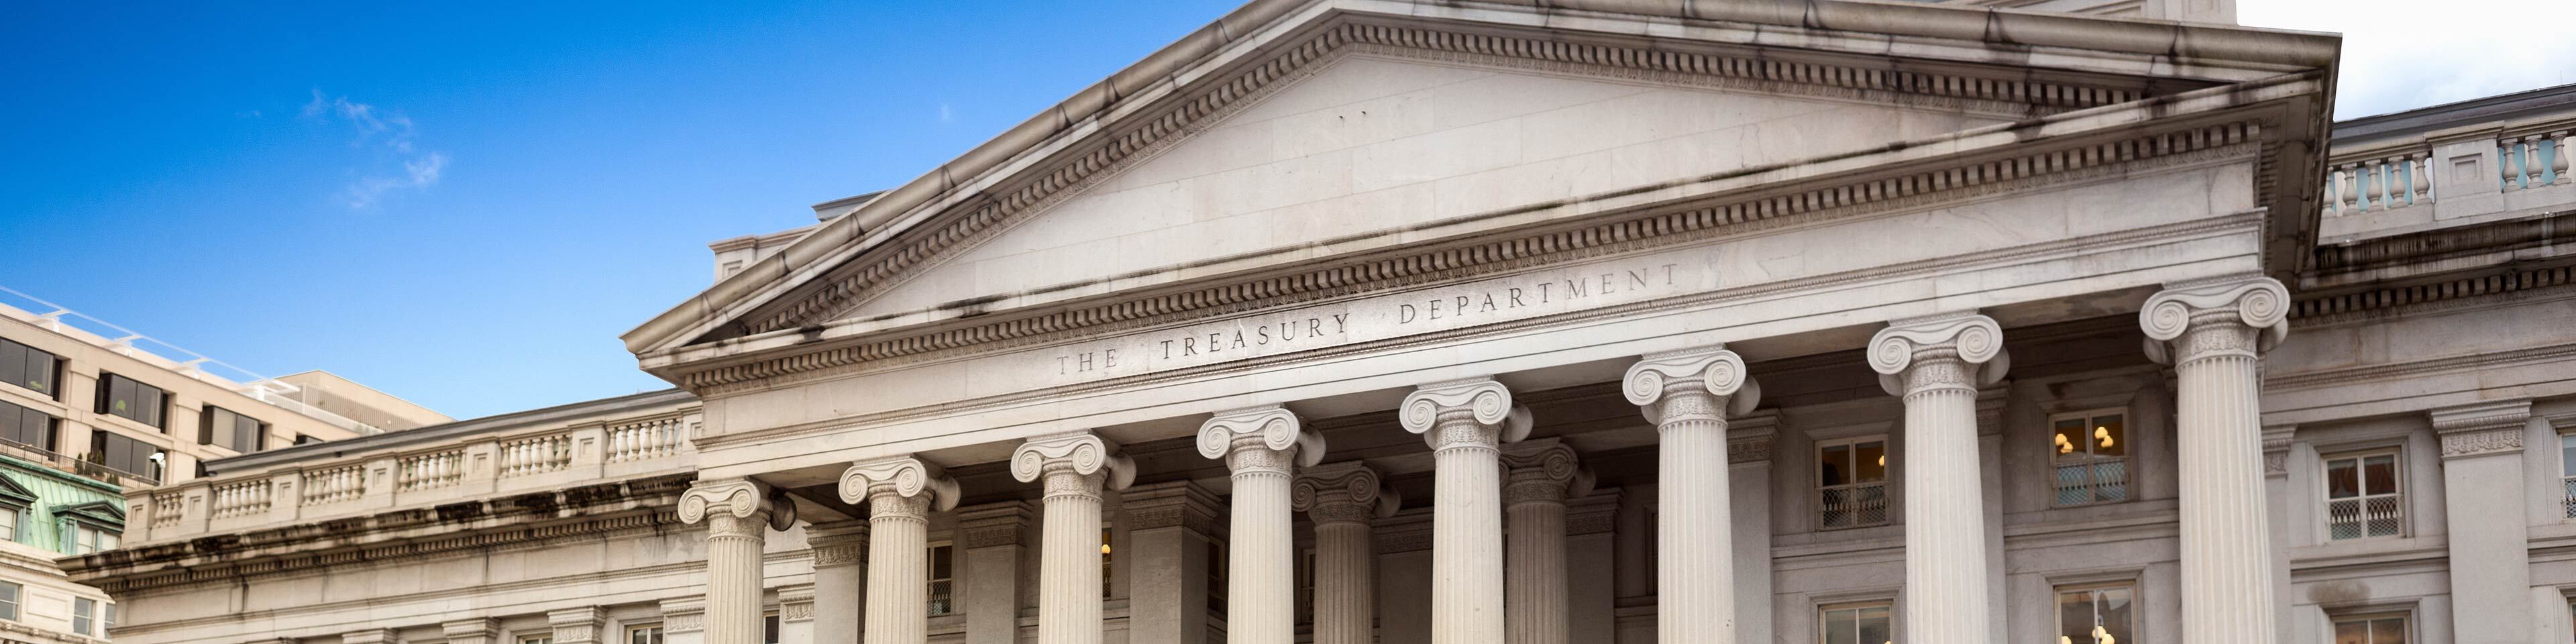 U.S. Treasury Department building related to beneficial ownership reporting